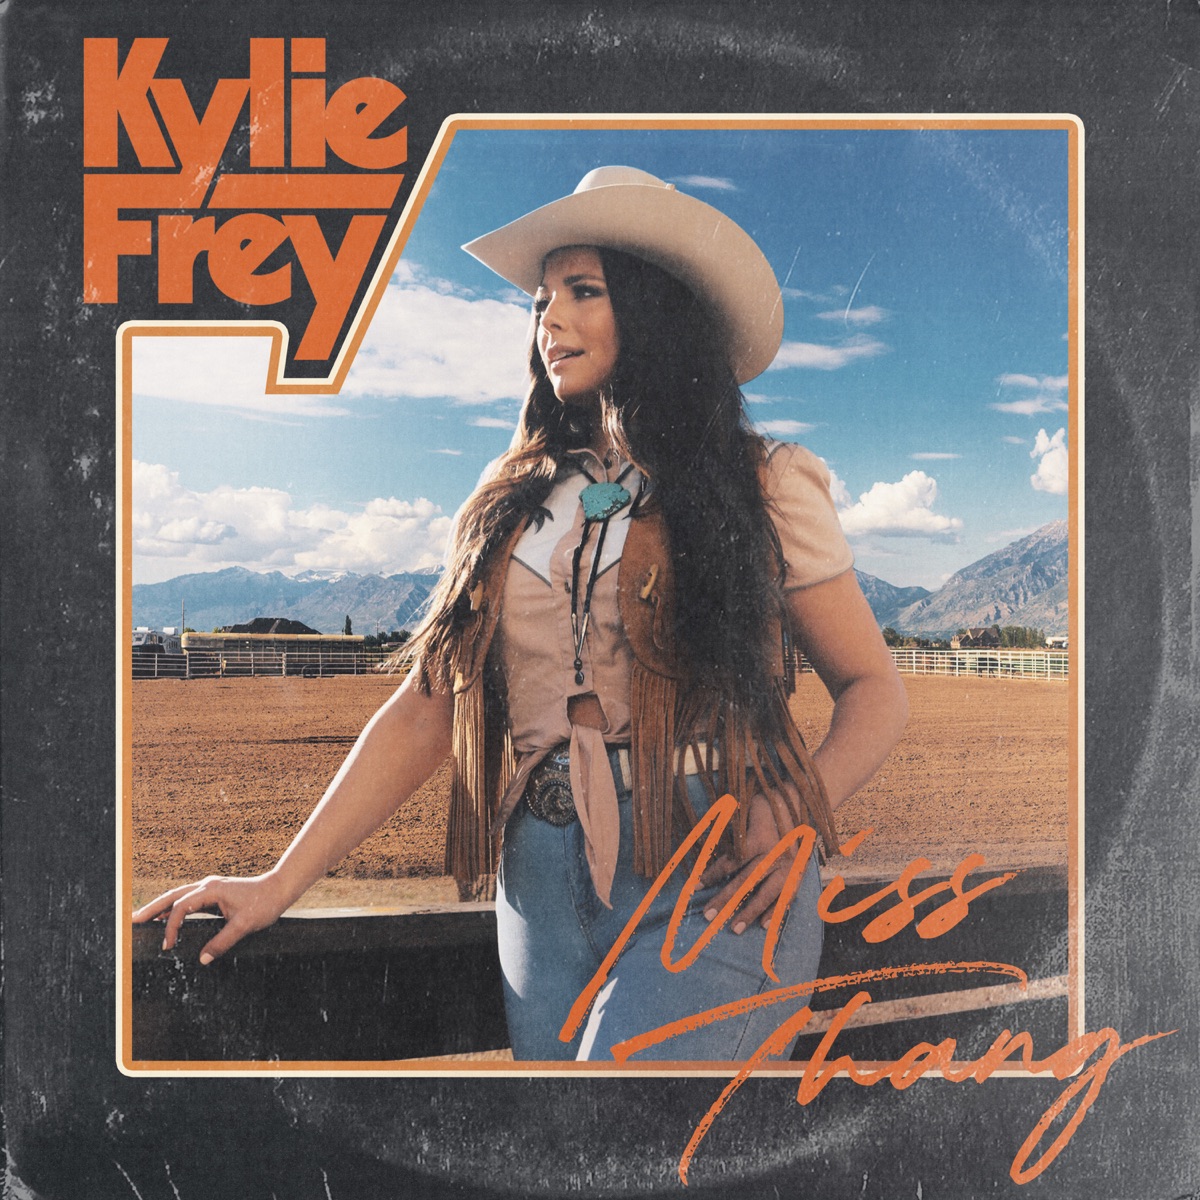 Kylie Frey — Miss Thang cover artwork